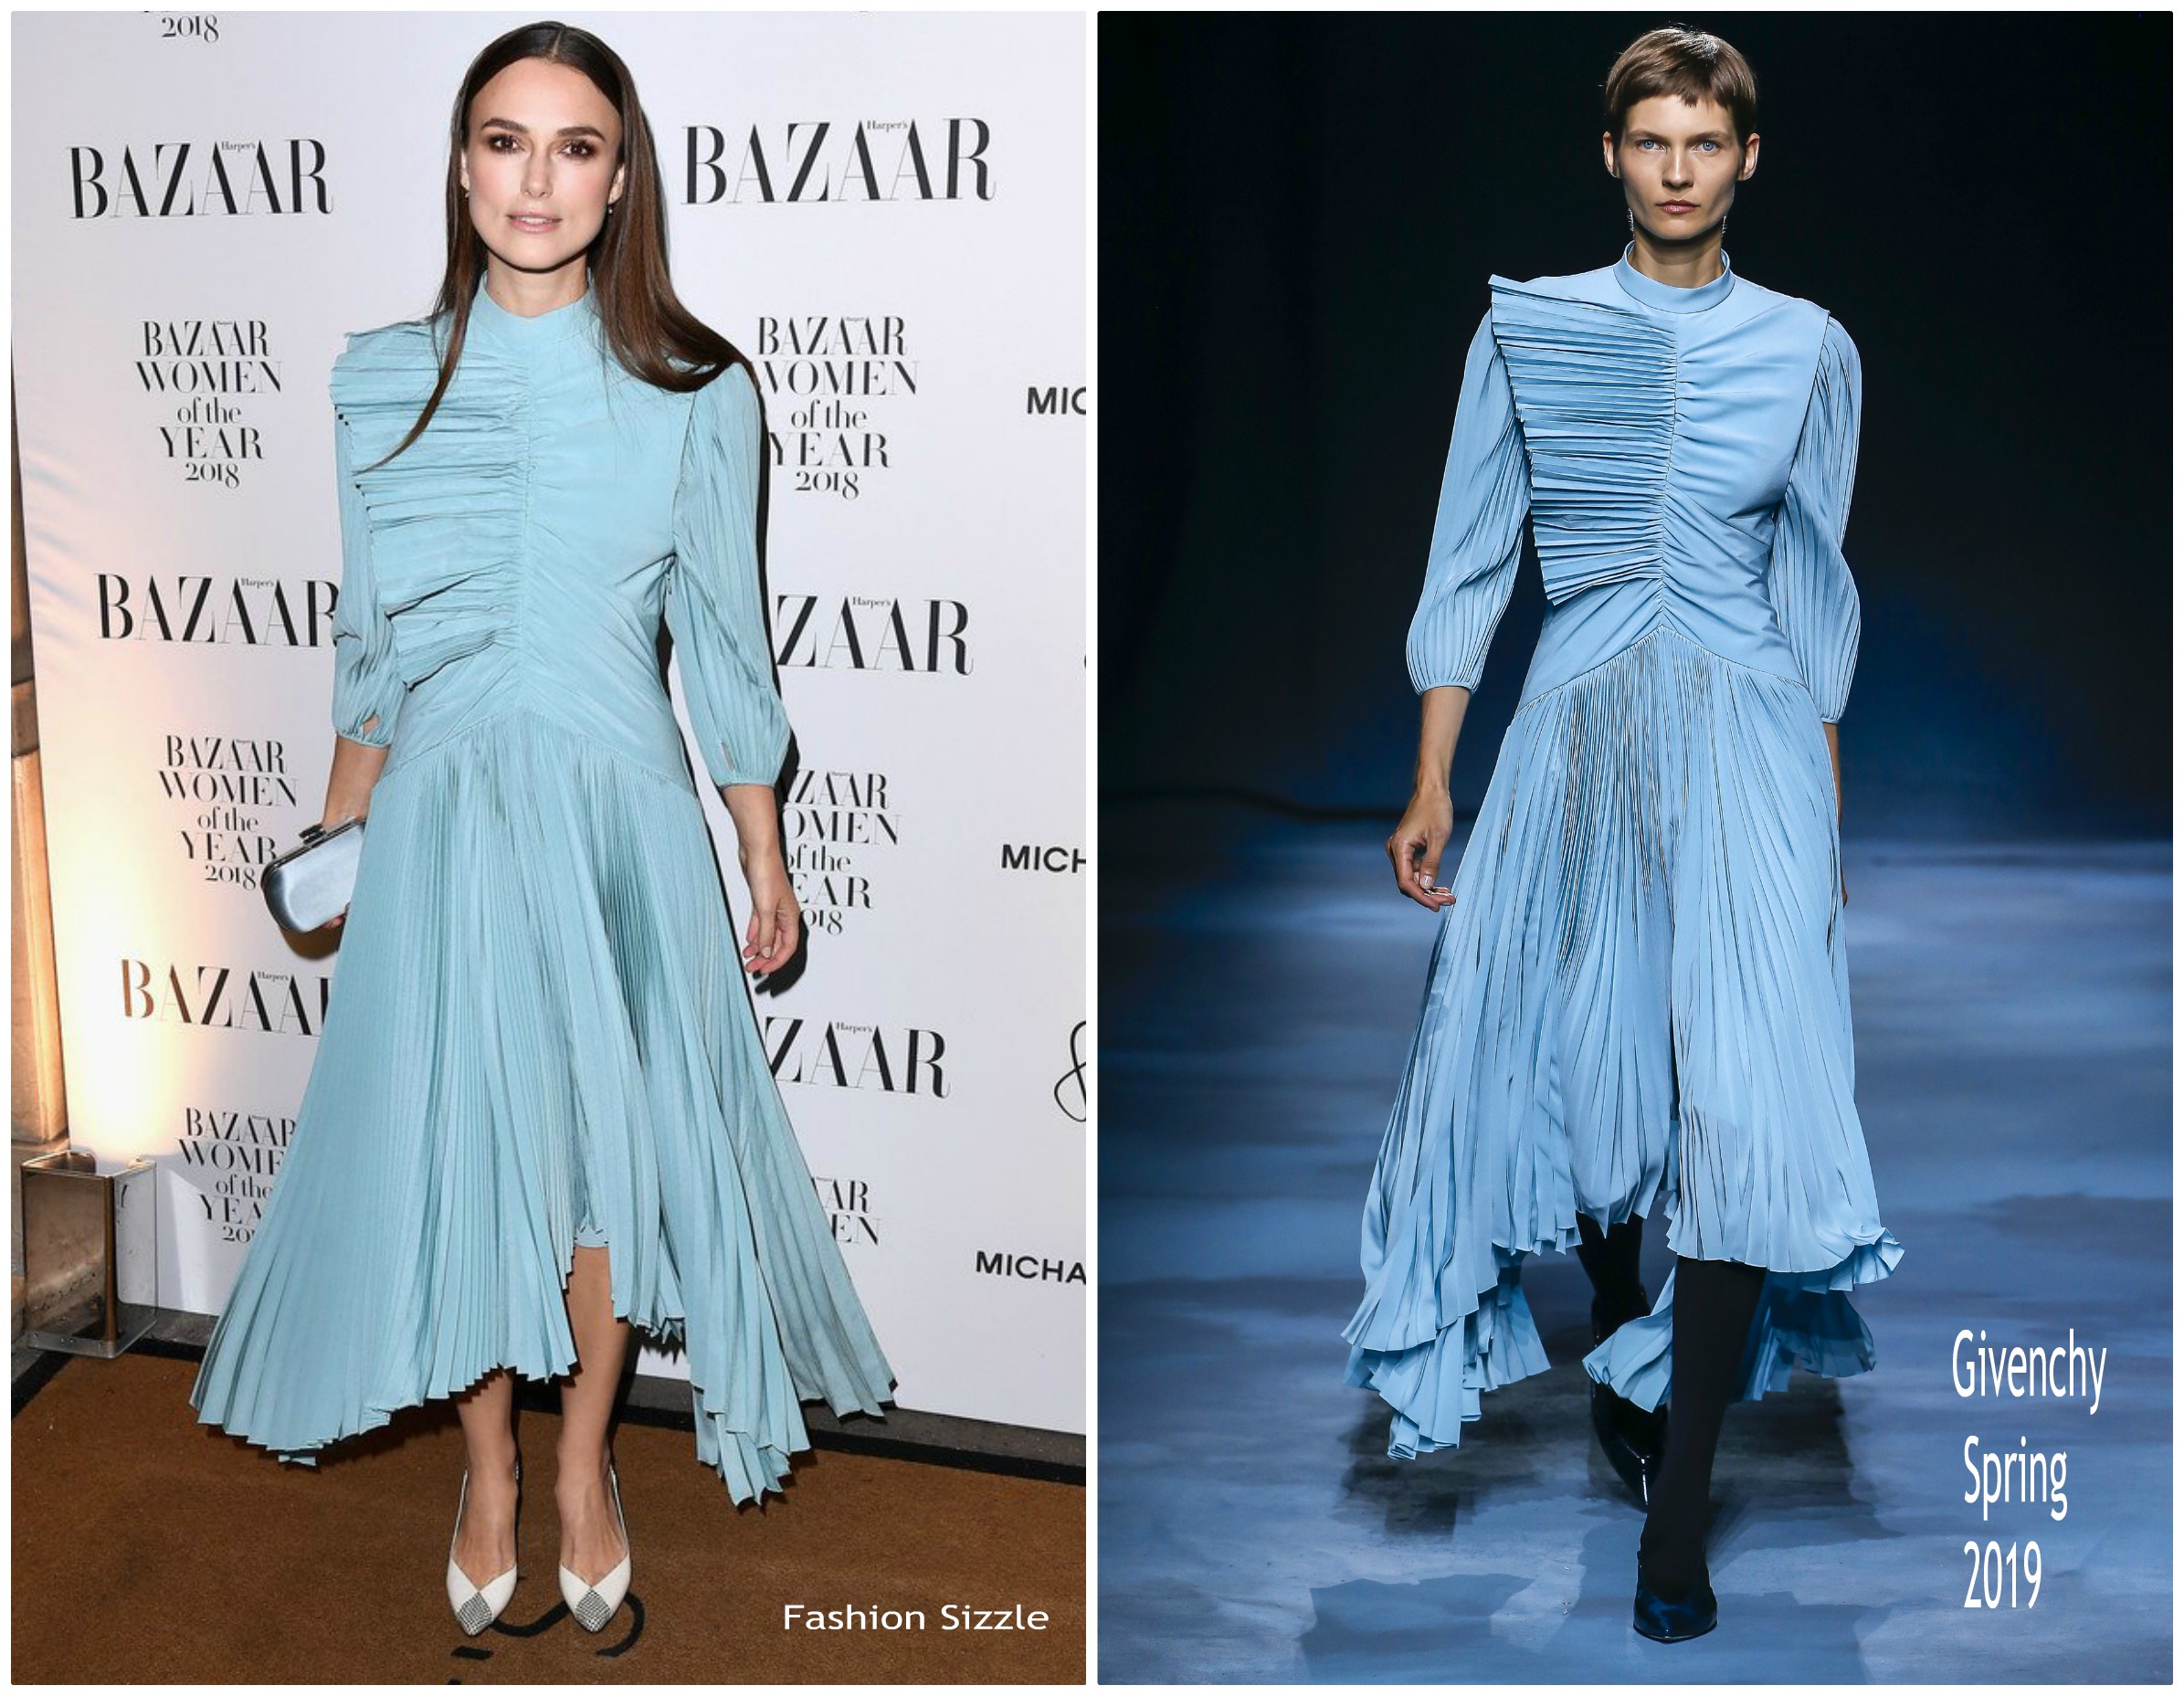 Keira Knightley In Givenchy @ 2018 Harper’s Bazaar Women of the Year Awards